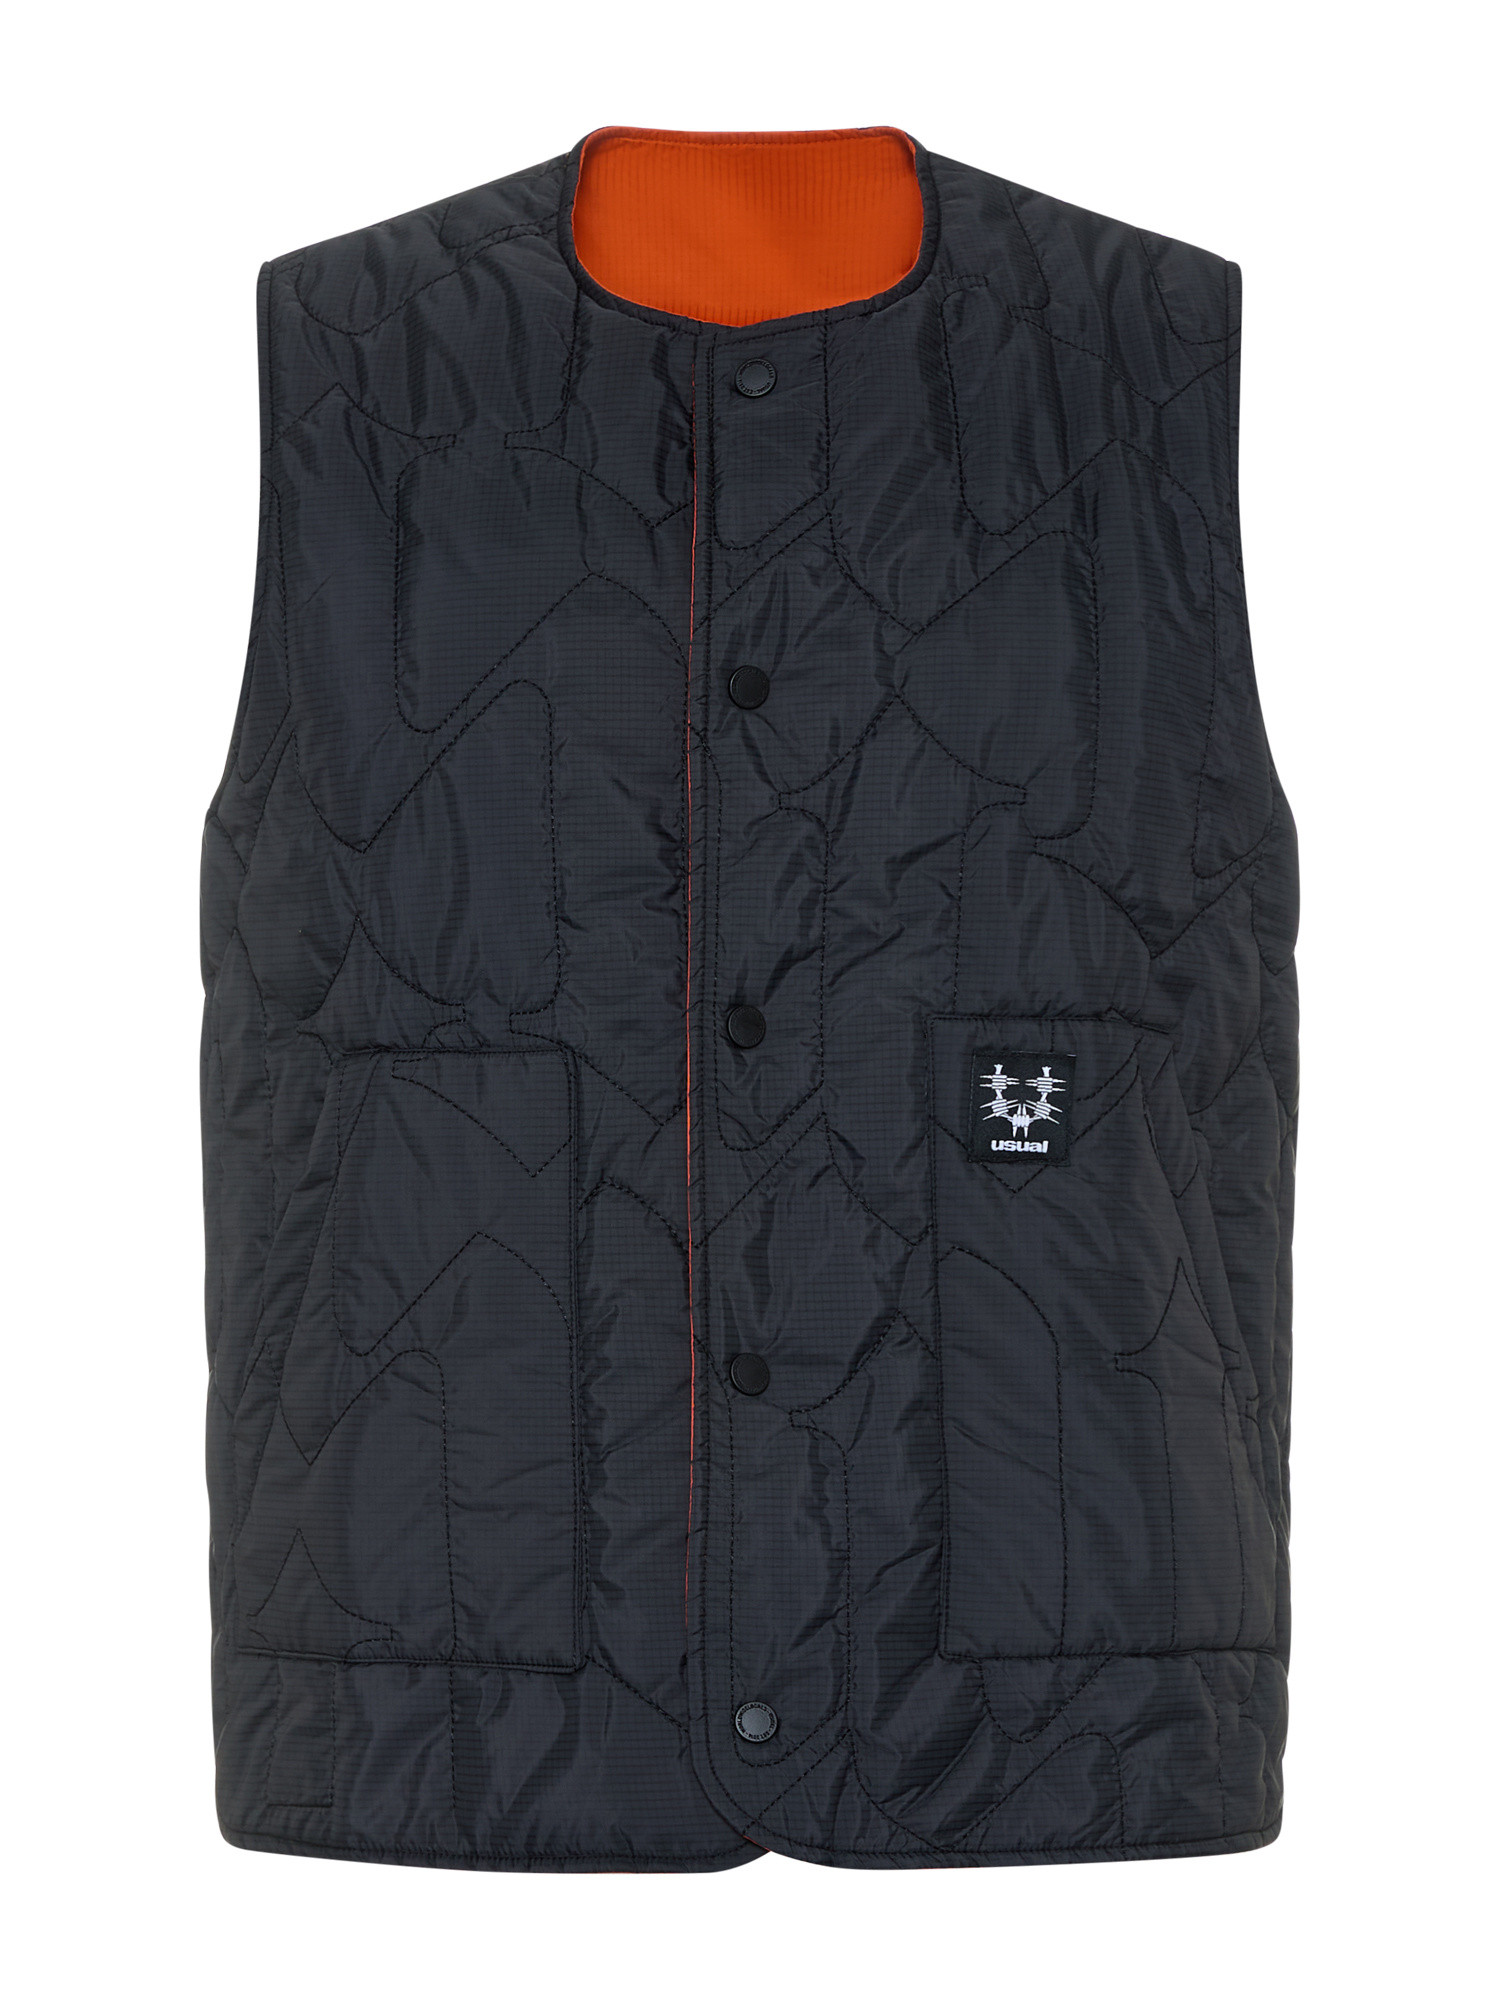 Usual - Gilet smanicato Trooper, Blu scuro, large image number 0